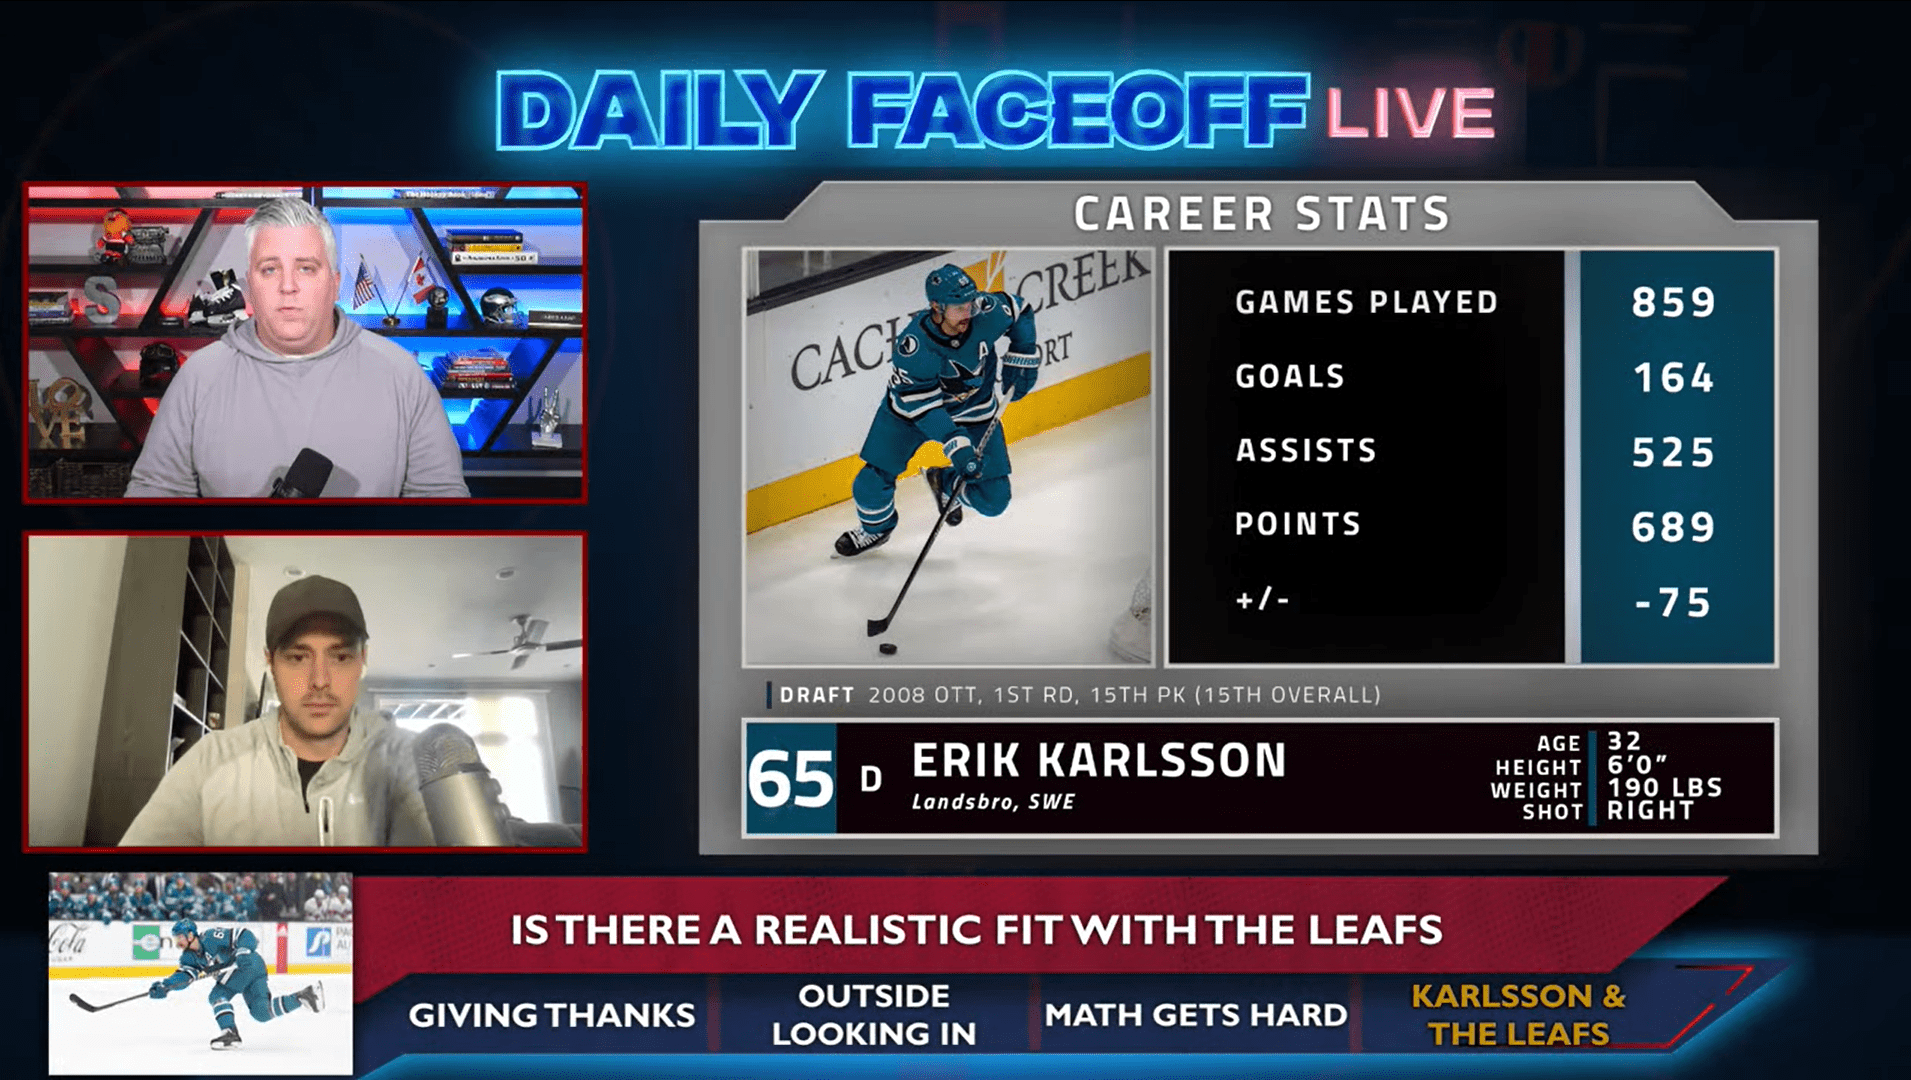 Daily Faceoff Live: Could the Toronto Maple Leafs make an Erik Karlsson trade work?